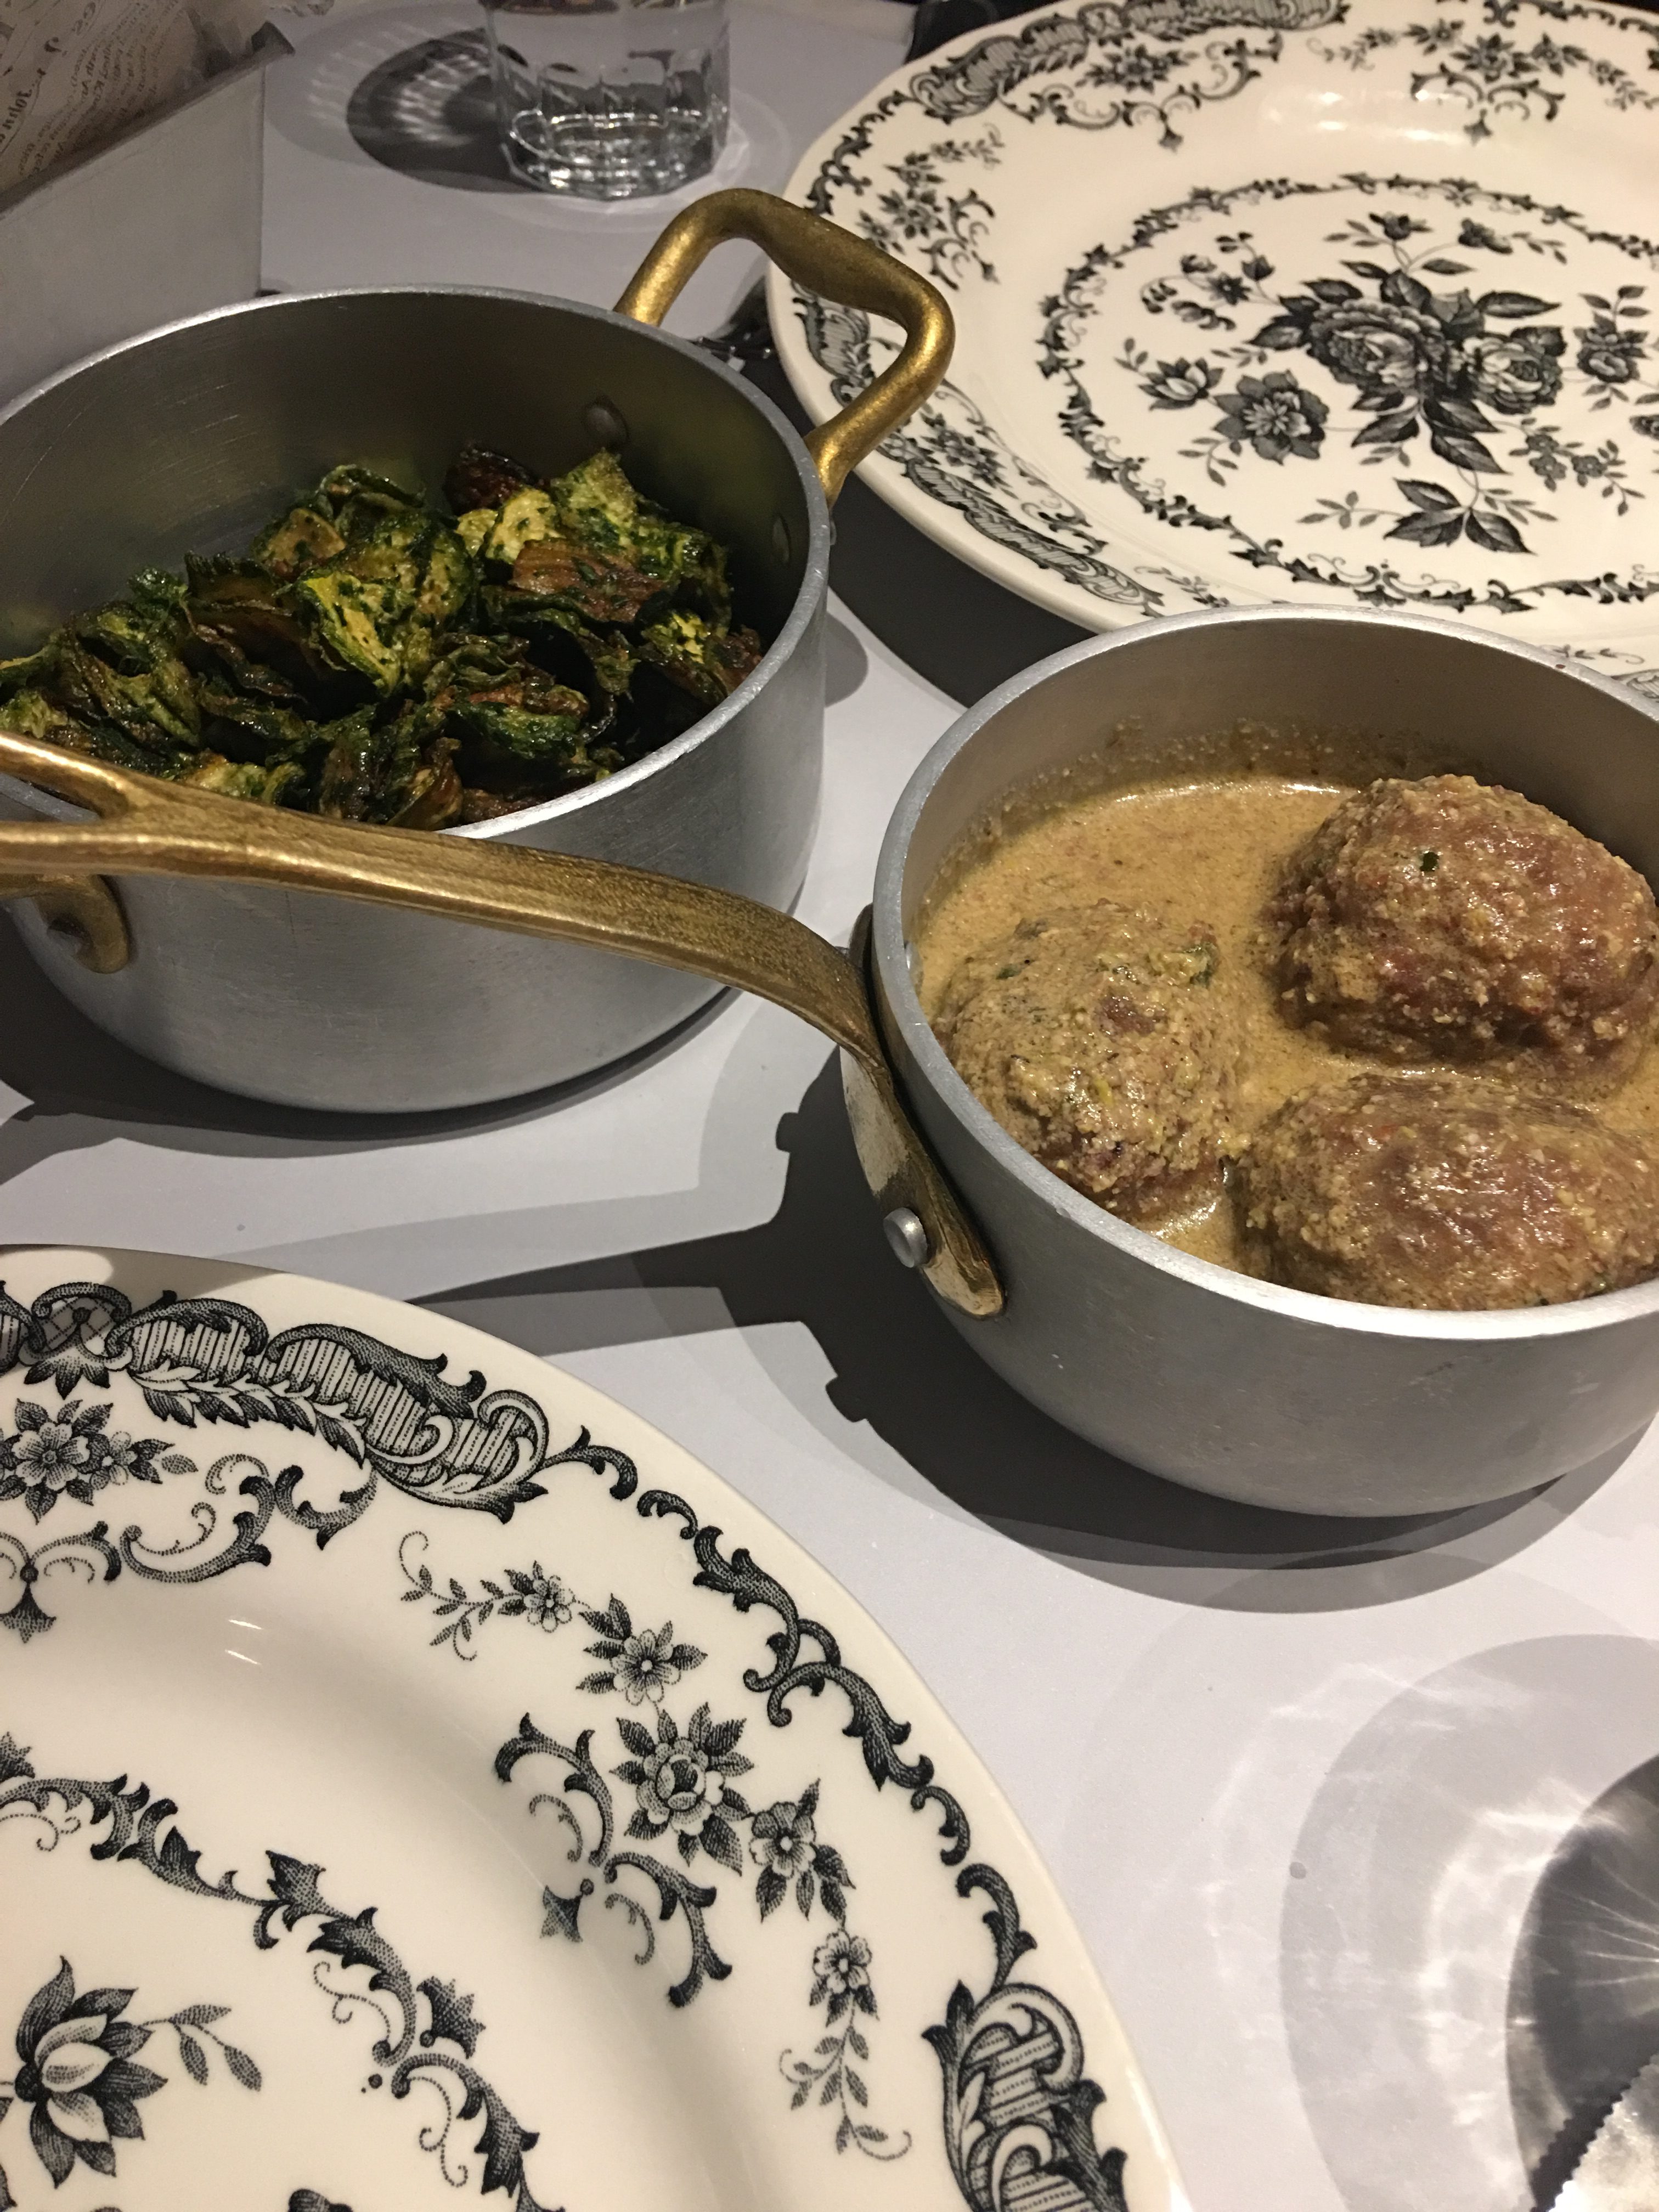 Meatballs with pistachio sauce at Dilla